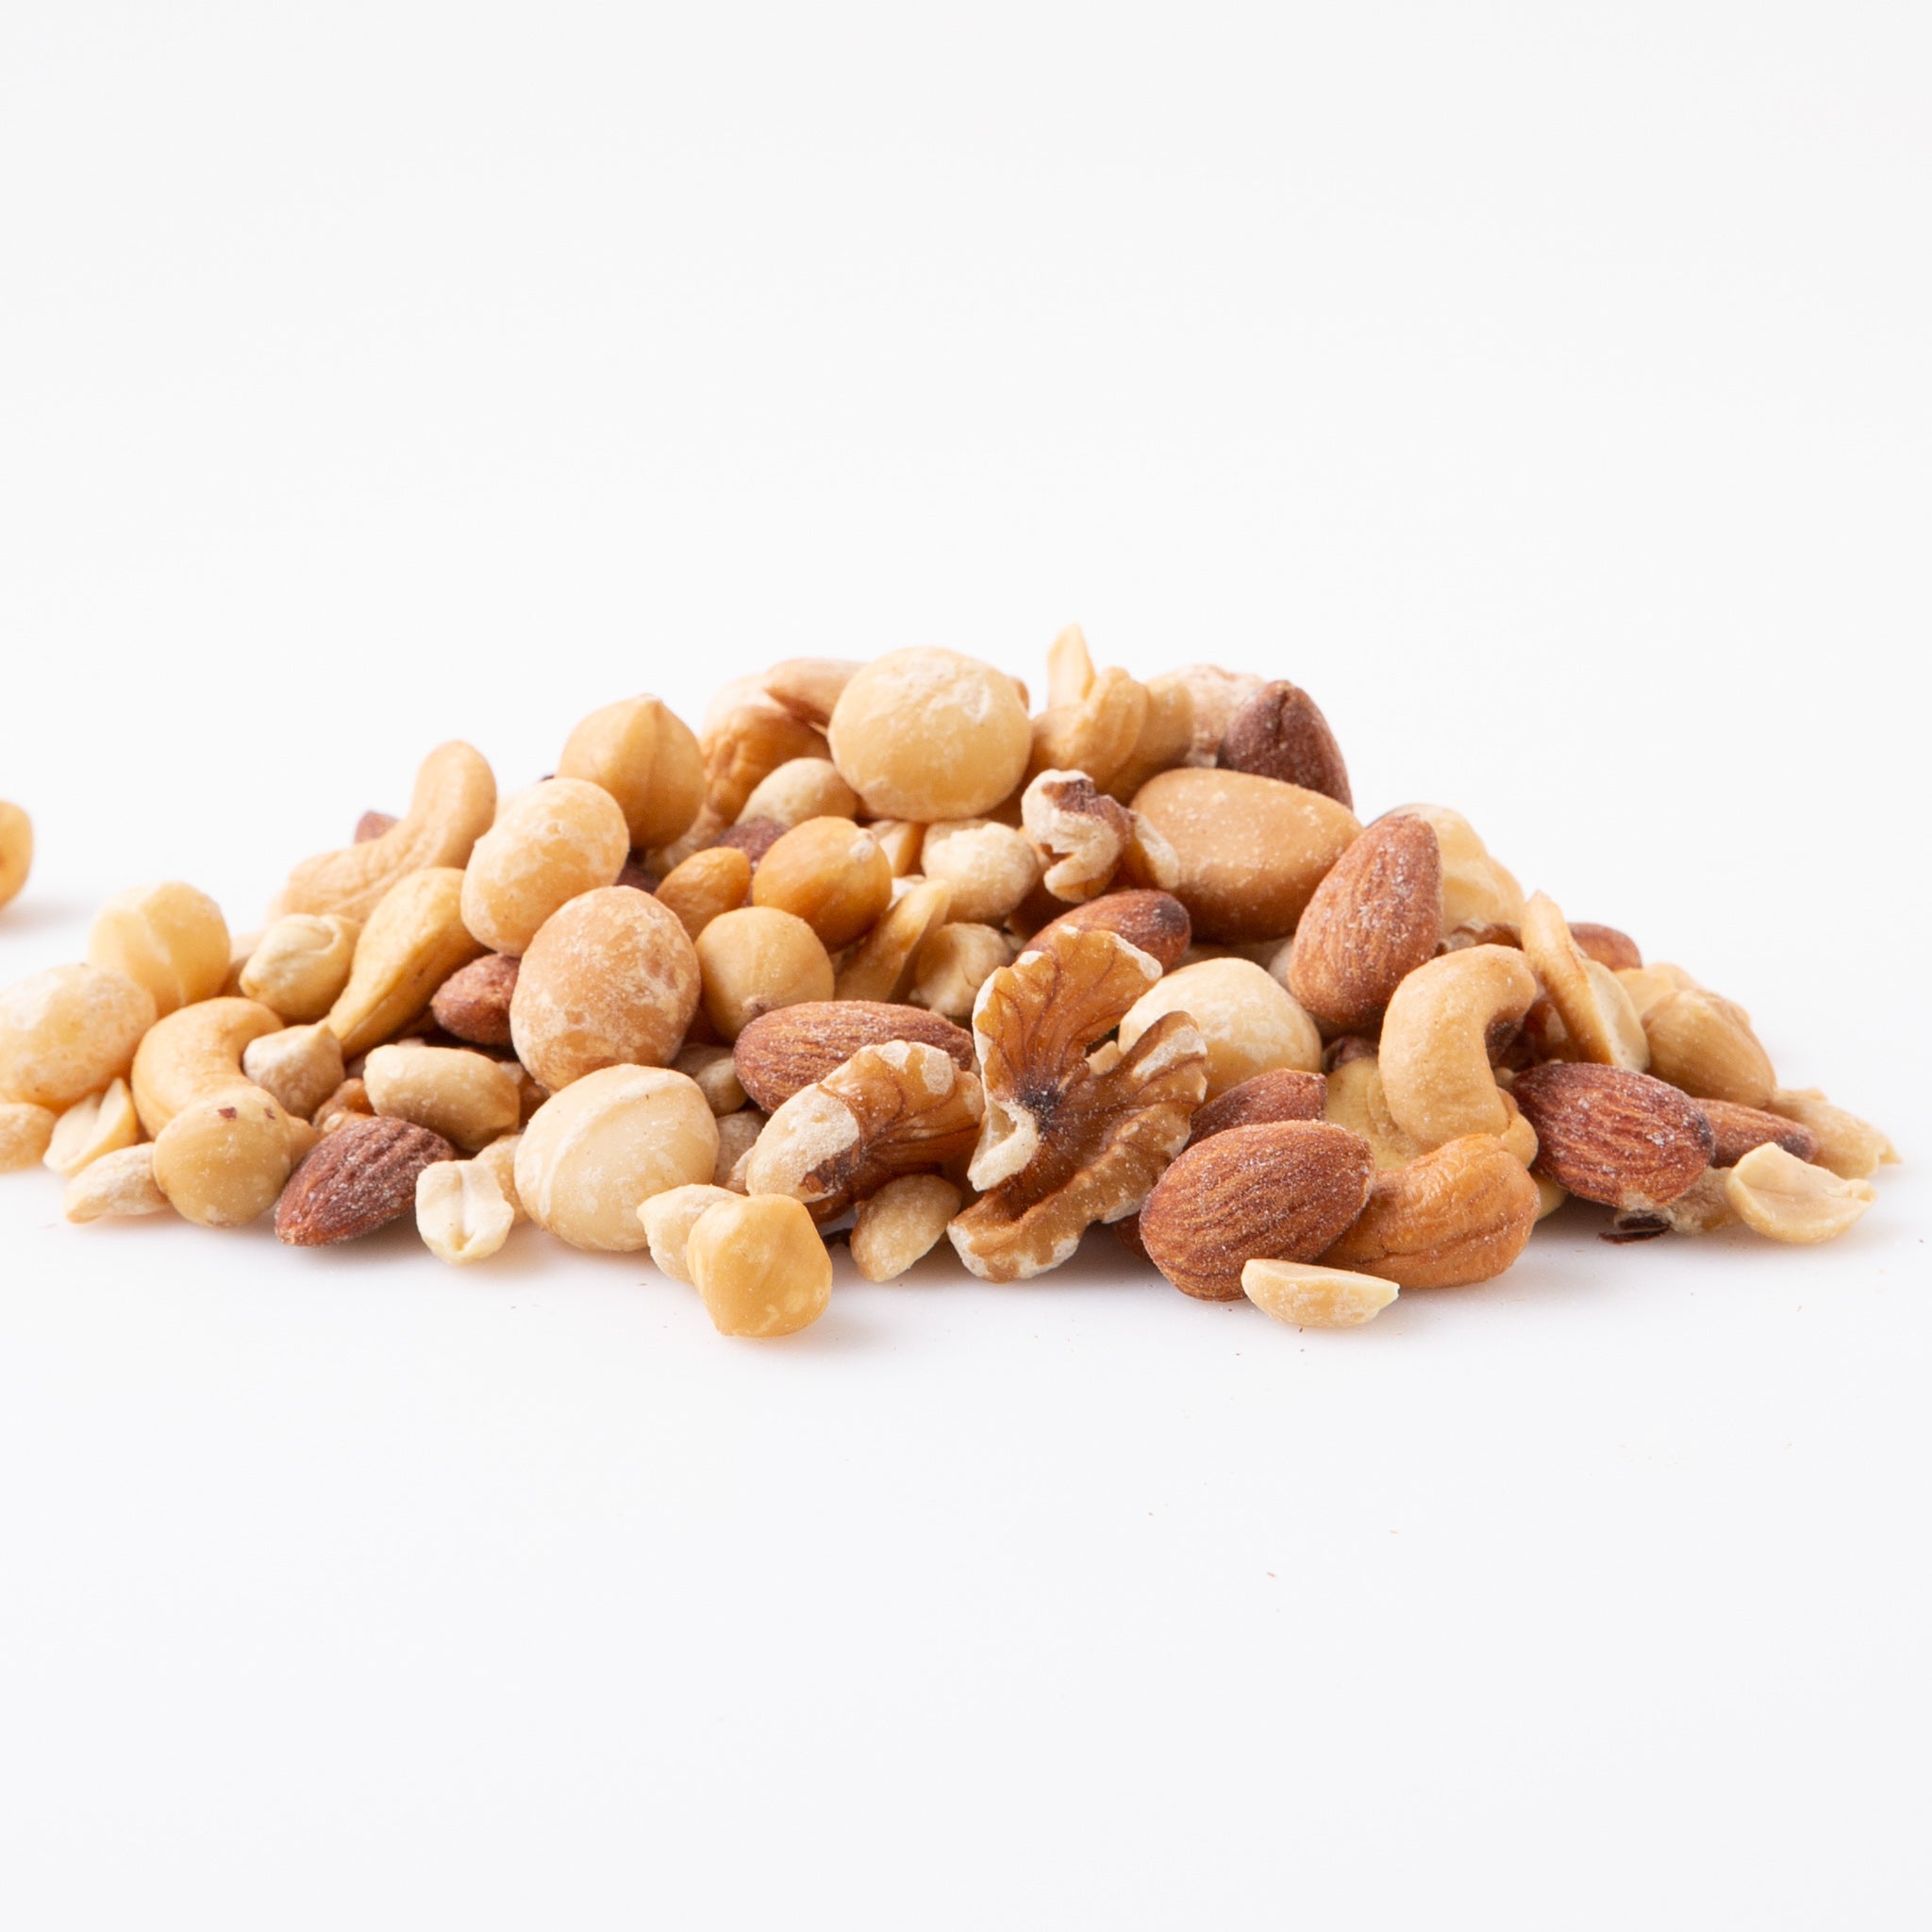 Roasted Salted Nut Mix - With Peanuts (Roasted Nuts) Image 3 - Naked Foods